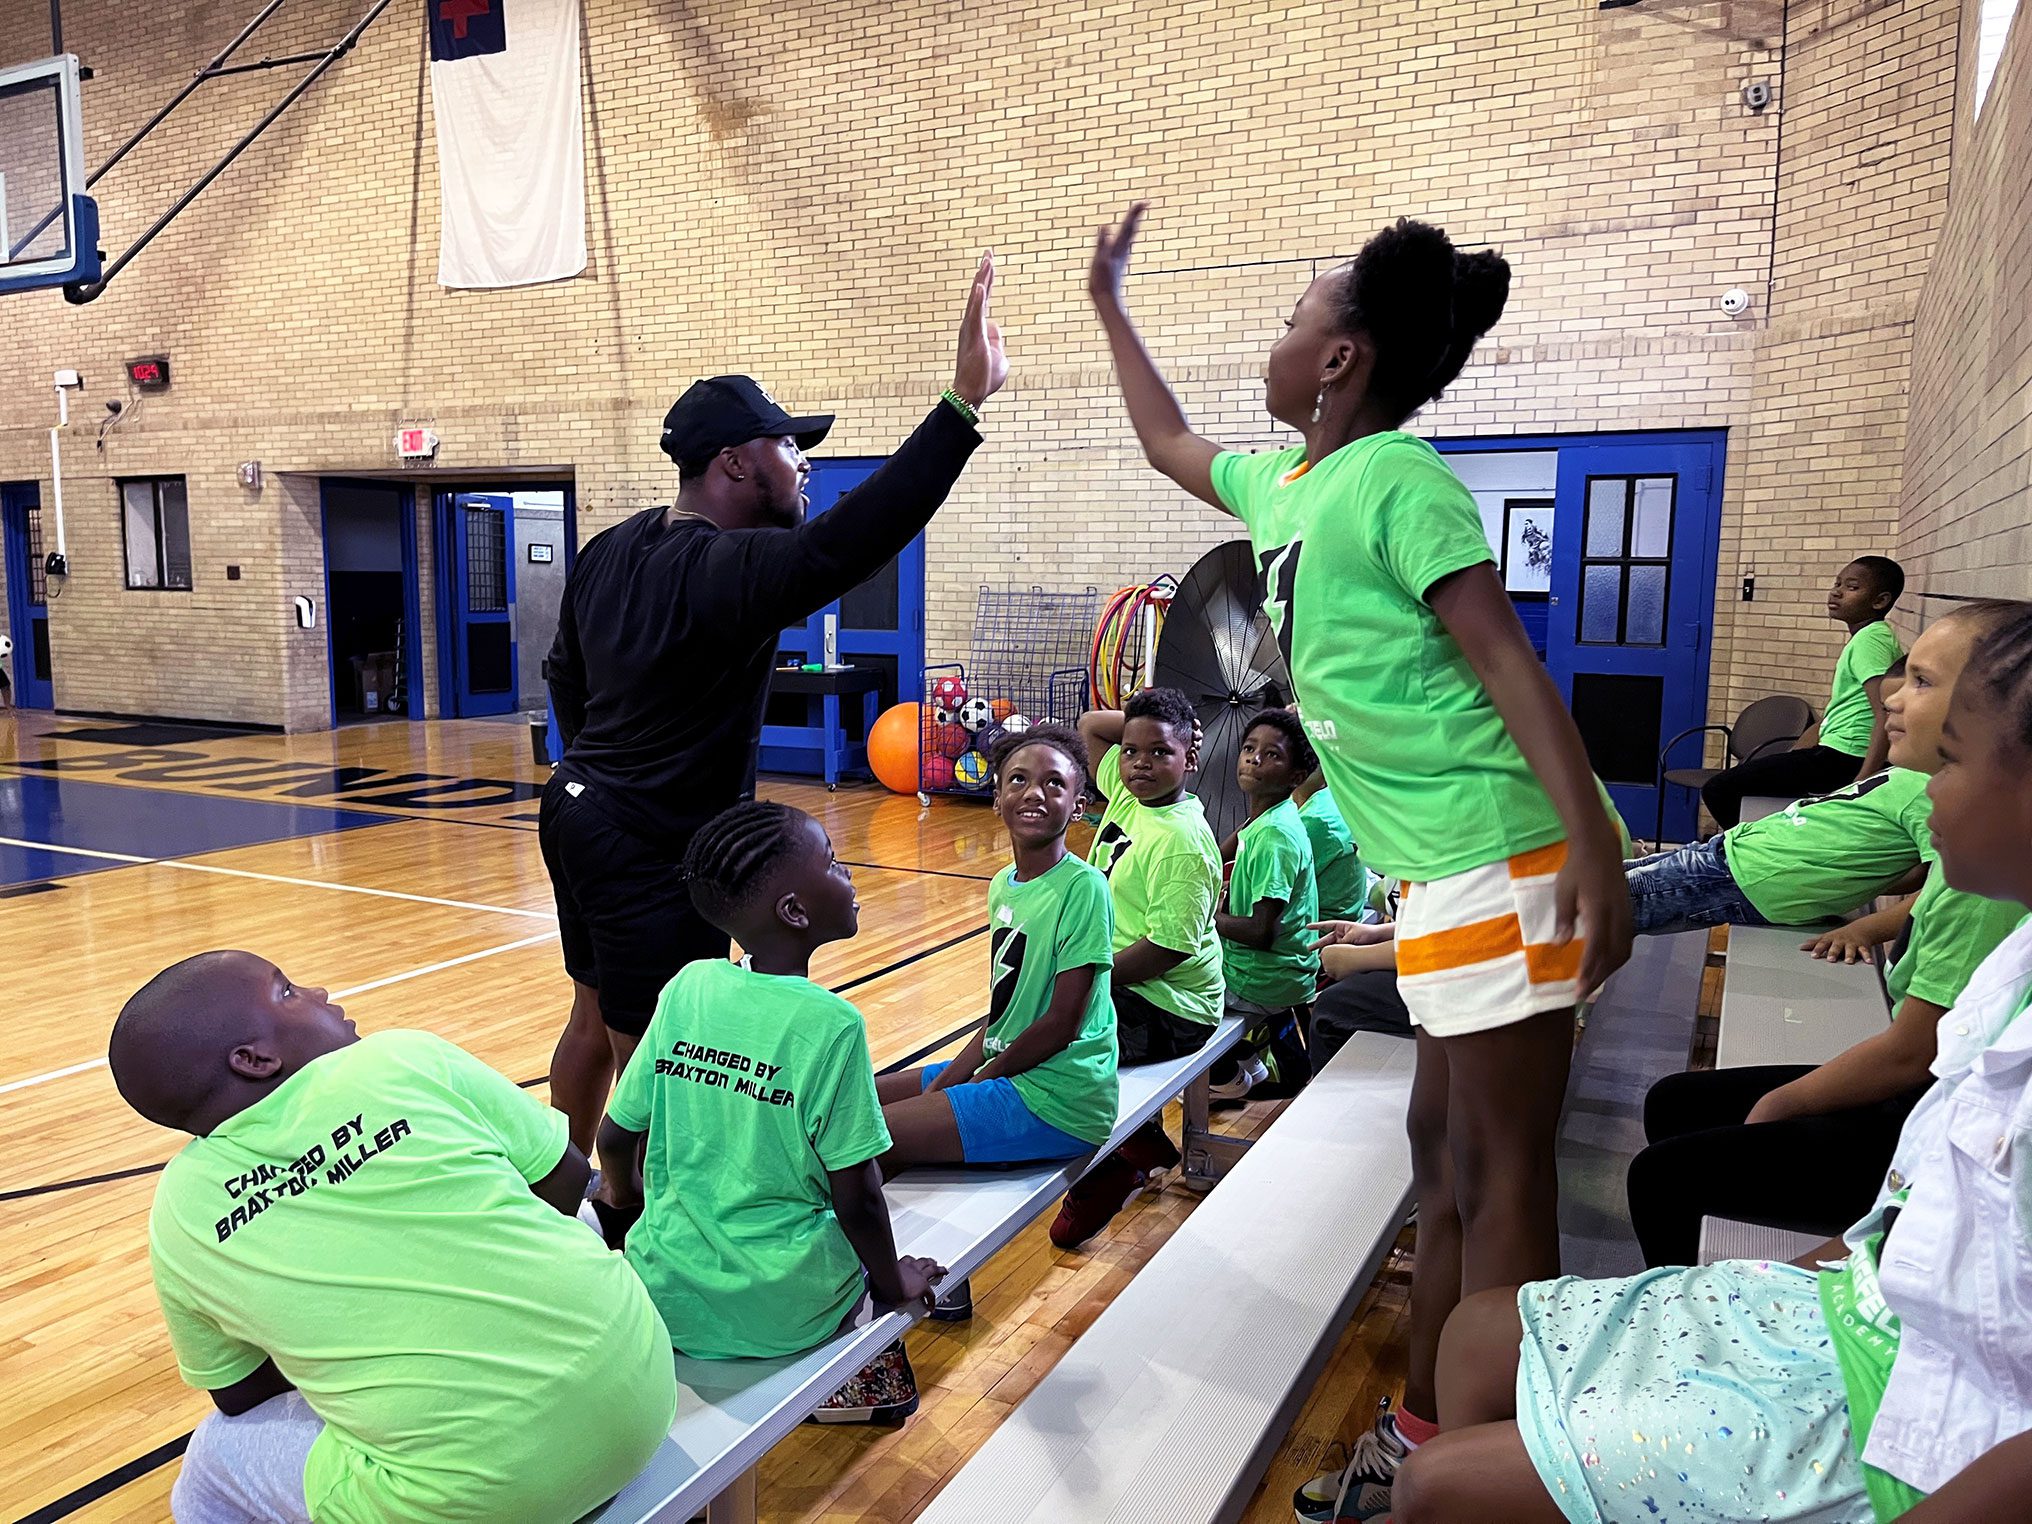 Students in the gymnasium with the teacher high-fiving one another